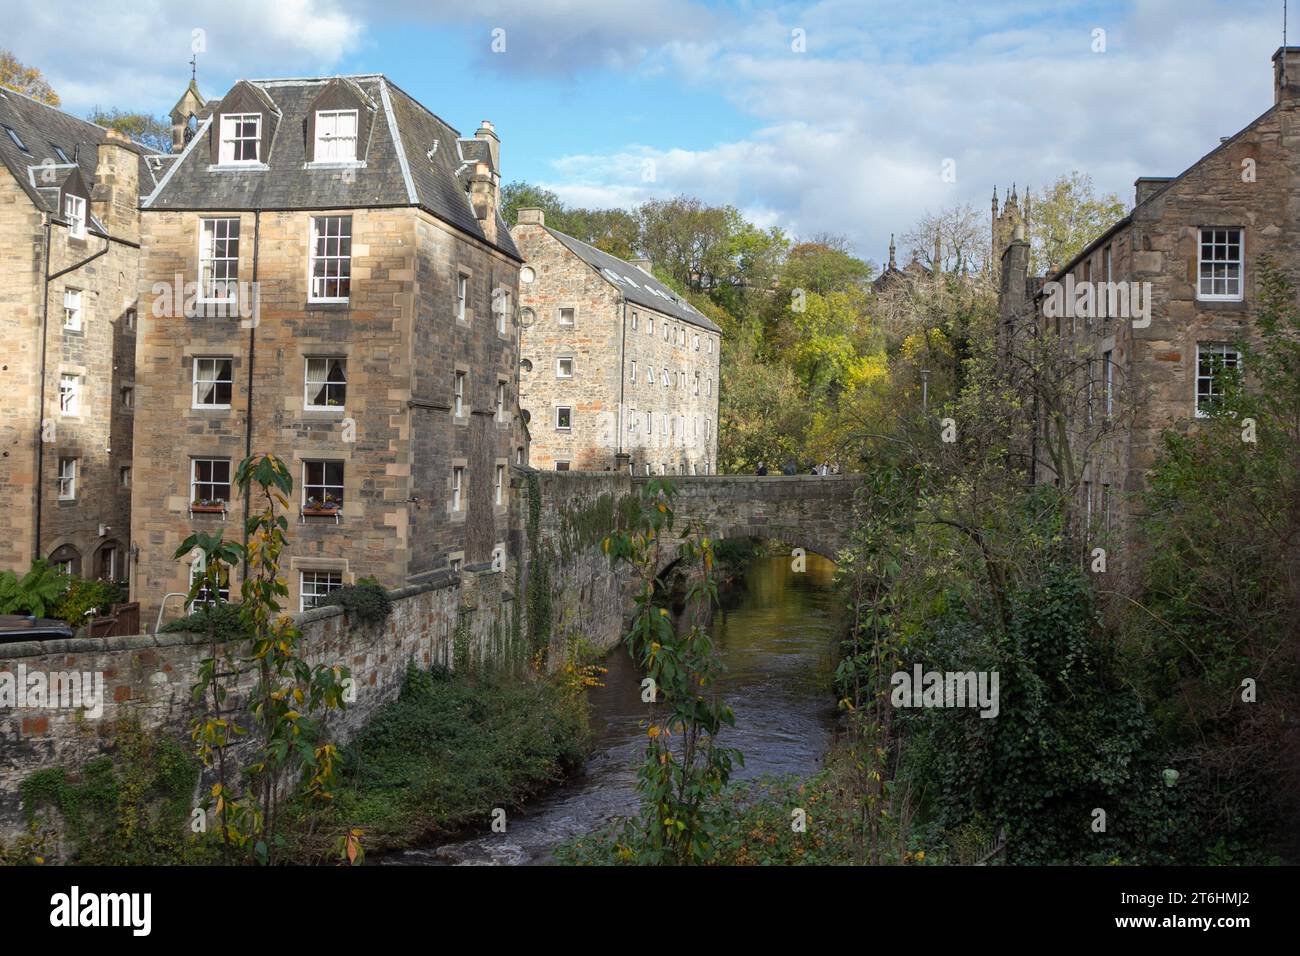 Edinburgh: the early 18th century single span Bells Brae bridge sits on an historic river crossing on the Water of Leith in Dean Village. Stock Photo